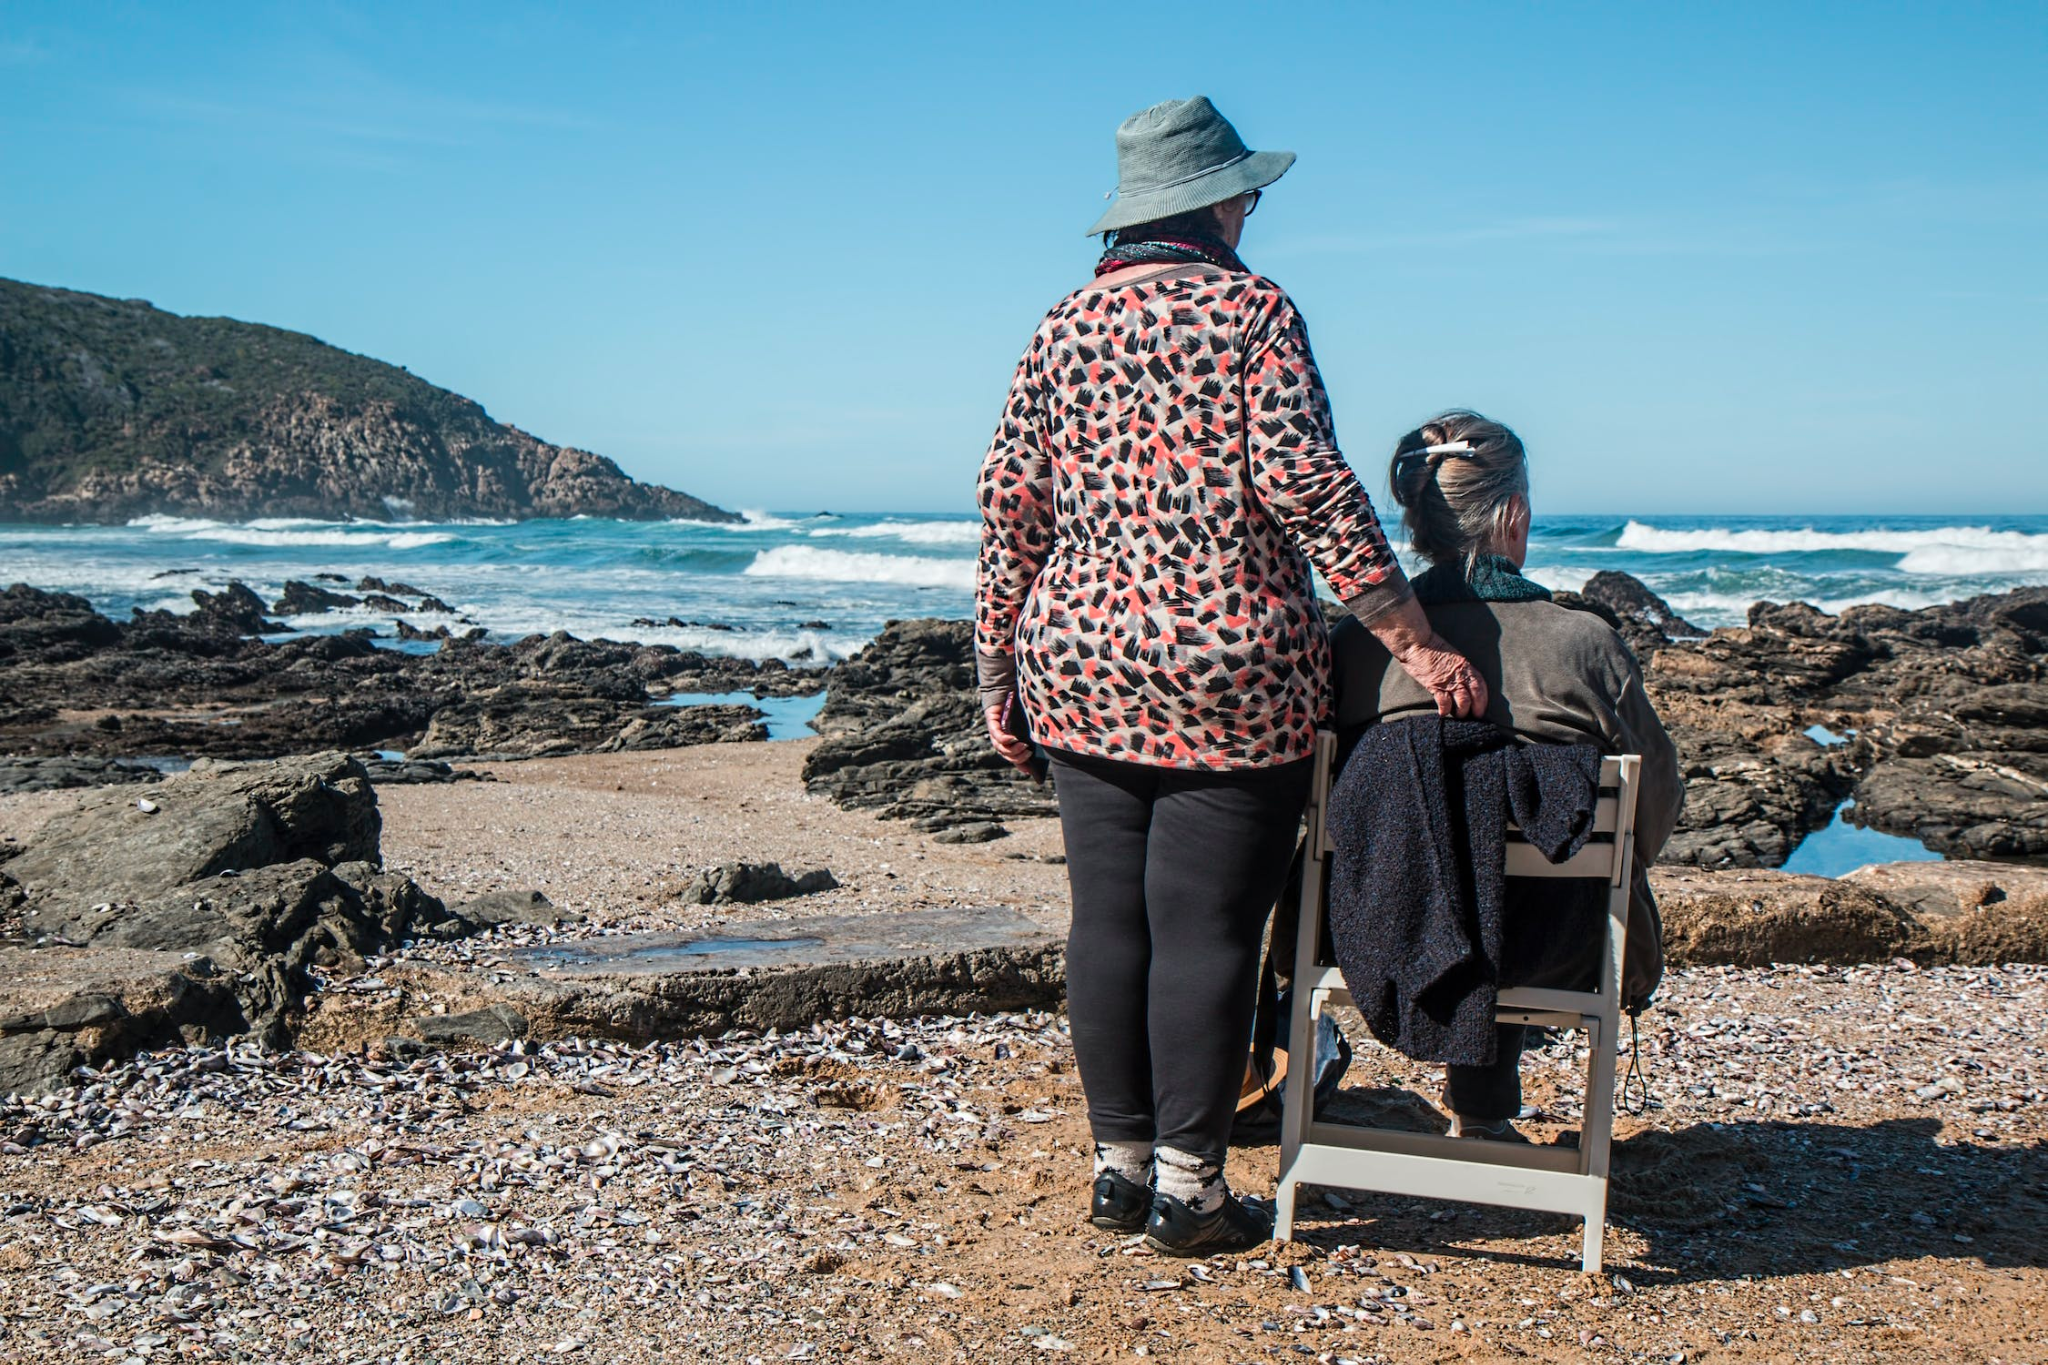  A caregiver accompanies an elderly client on an outdoor excursion. 